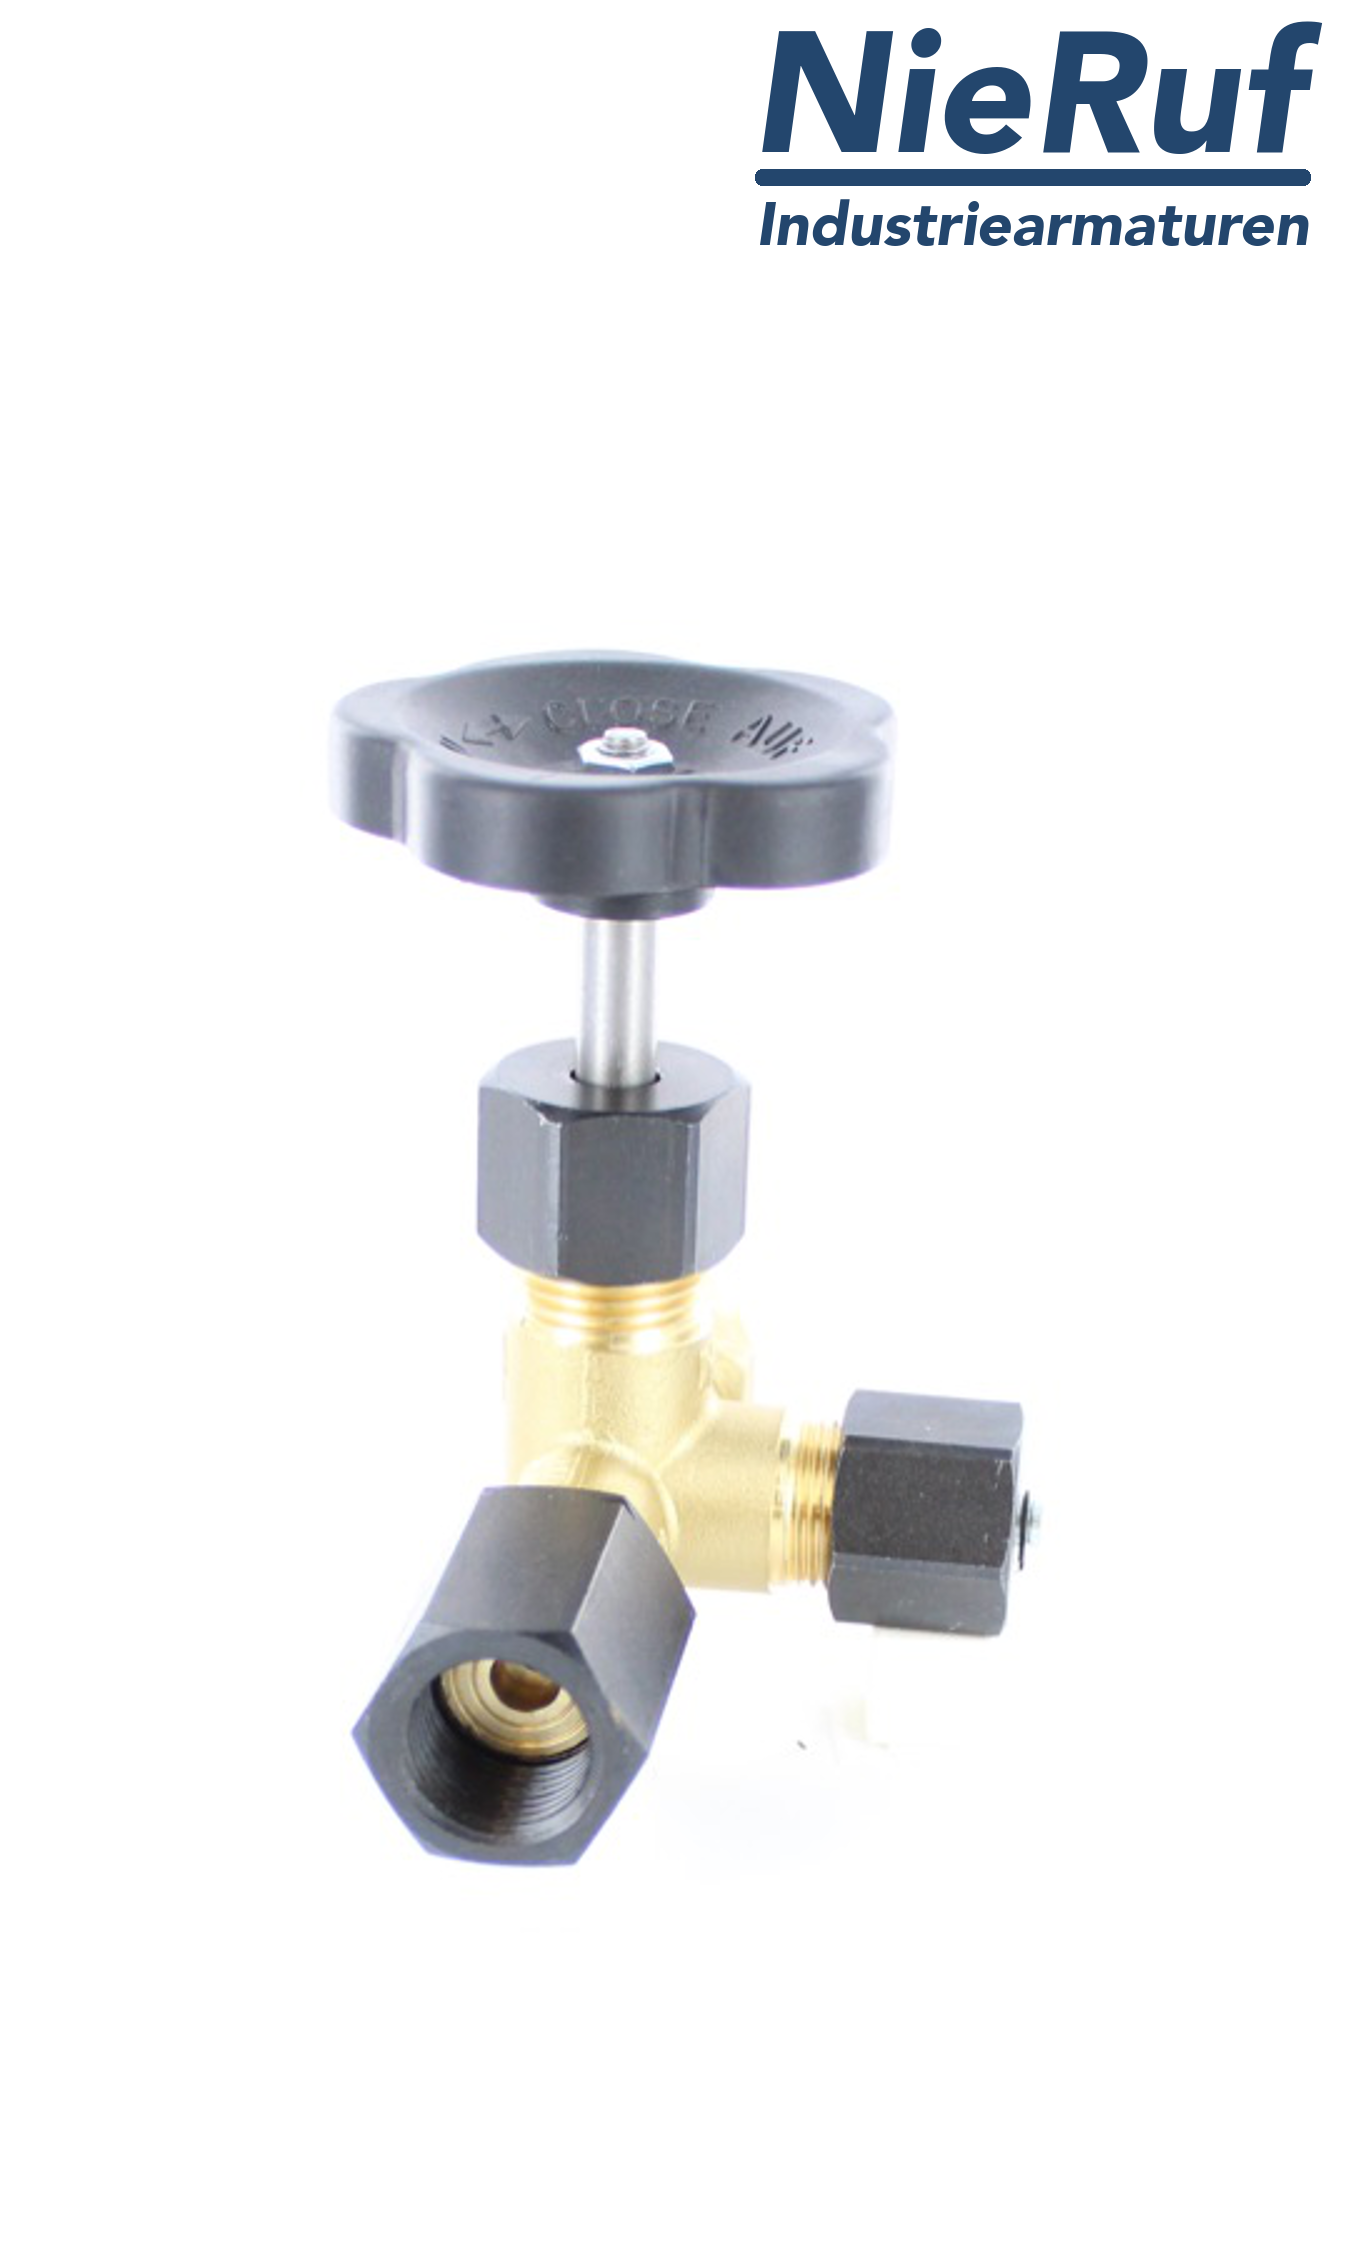 manometer gauge valves DIN 16271 with 1/2" connection